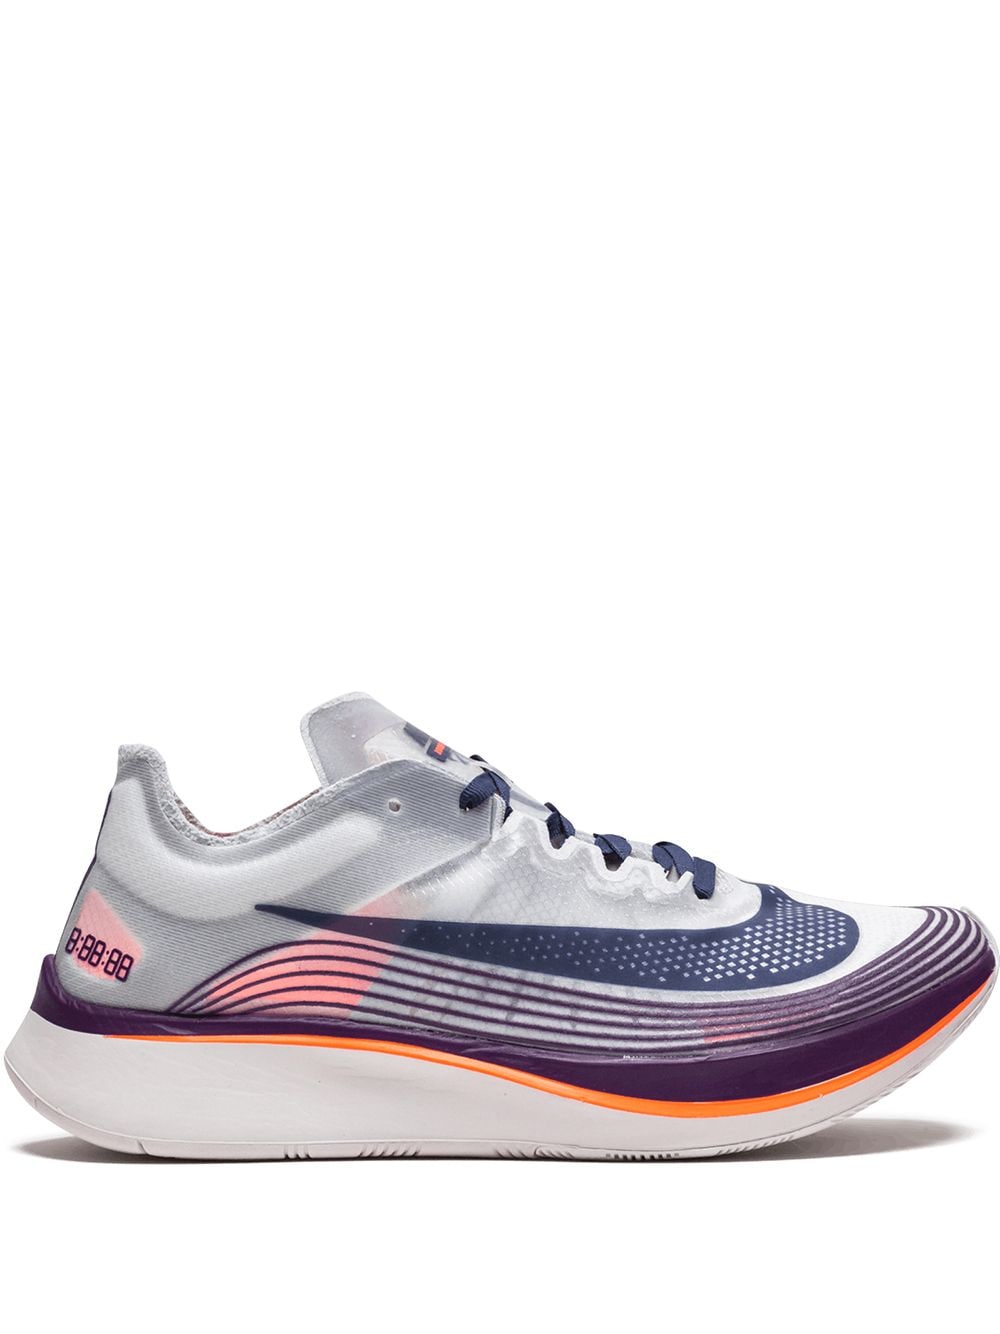 Nike Lab Zoom Fly Sp Sneakers In Multicolour